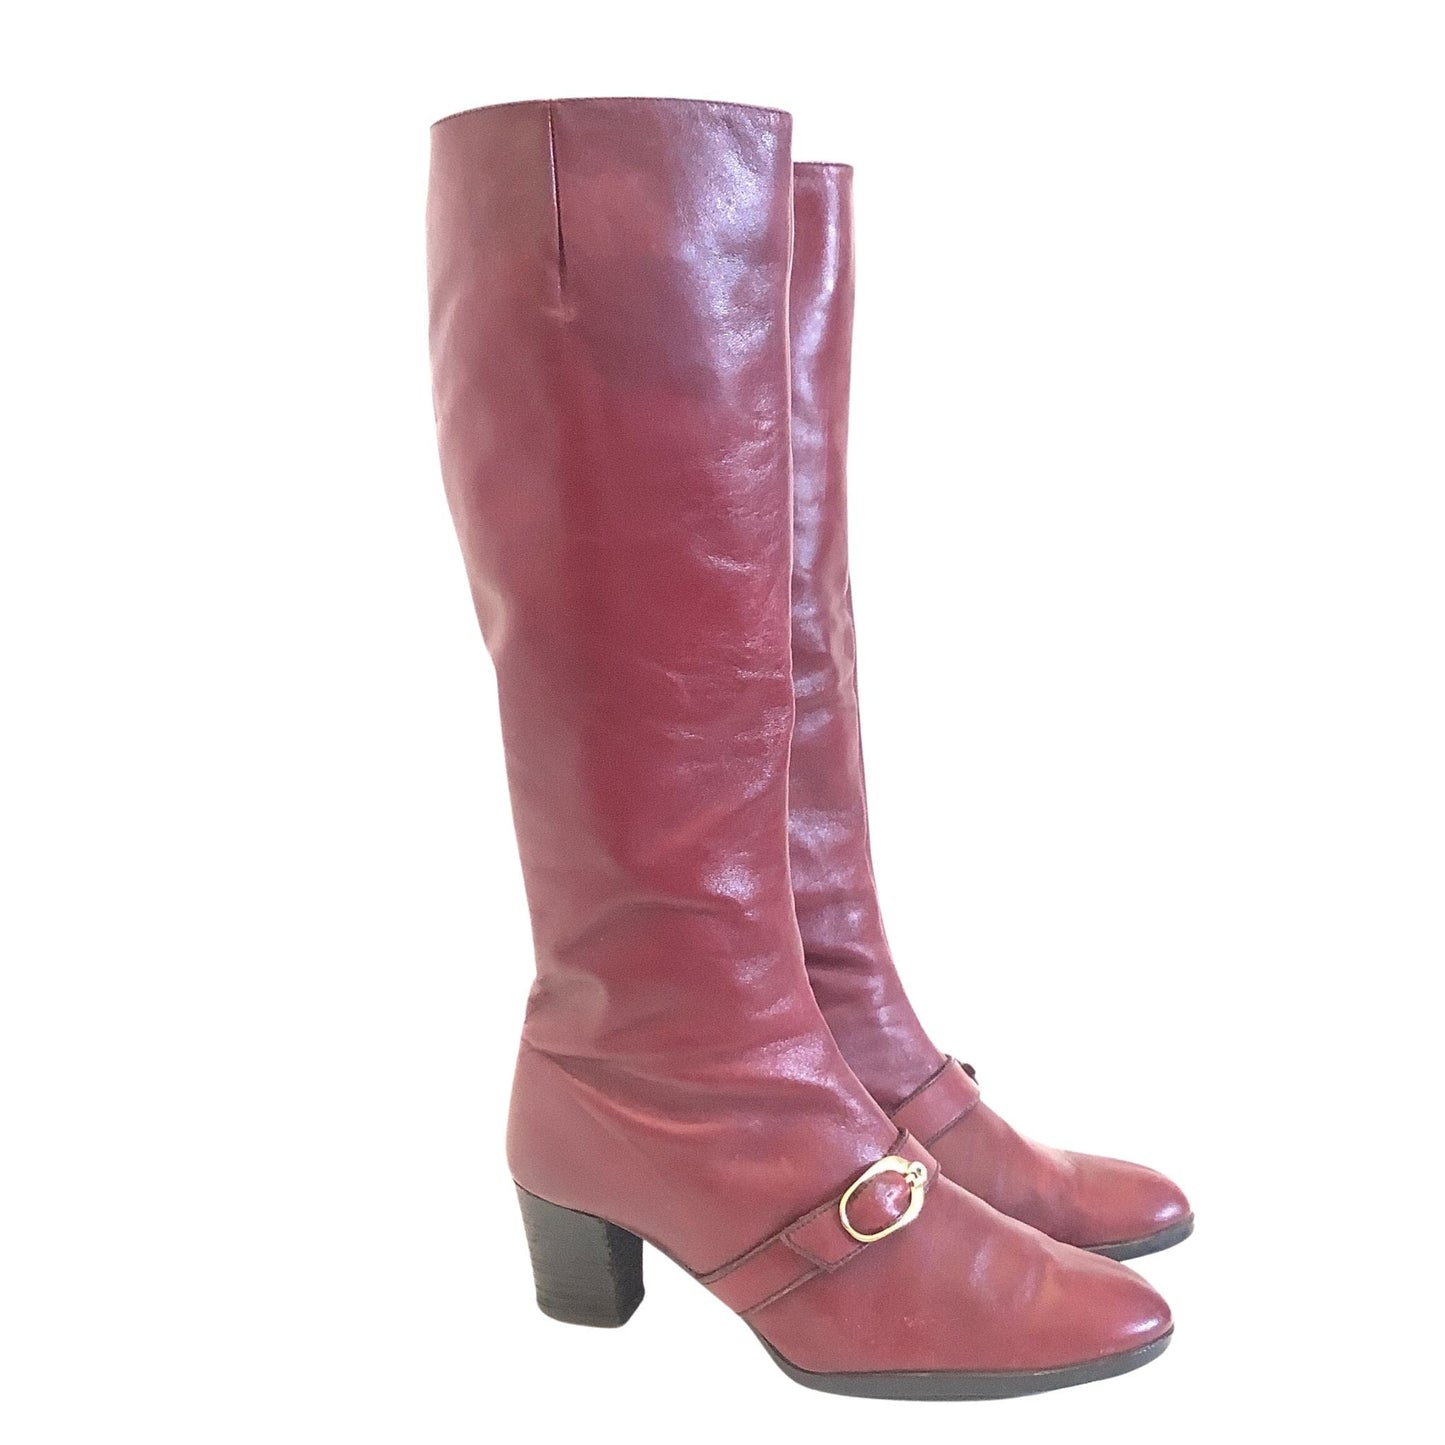 Aigner Tall Leather Boots 8 / Oxblood / Mod